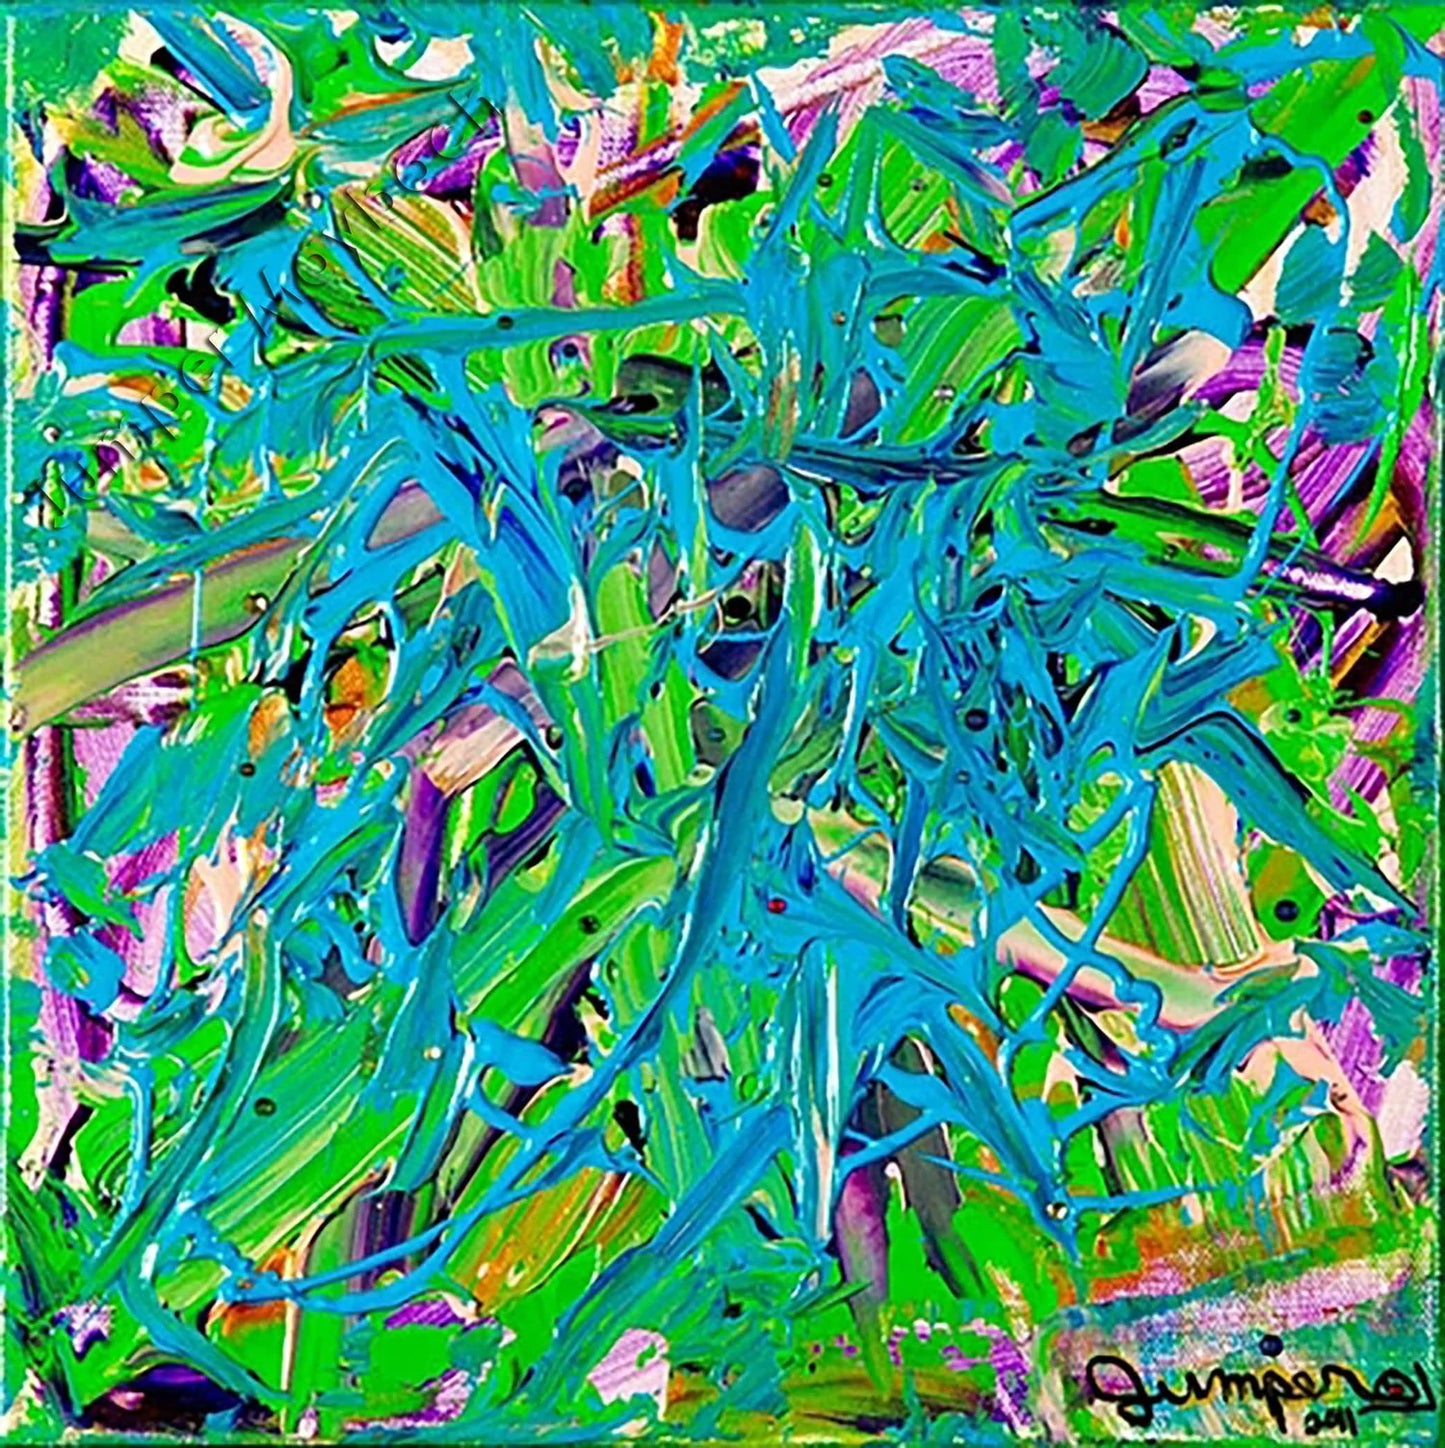 “Tropical Forest” of the Nature series is a beautiful masterpiece that has all the vegetation of a rainforest.12" x 12"
Acrylic Mixed Media on stretched canvas 2014
Tropical Forest         PNTArtworkJumper MaybachJumper Maybach